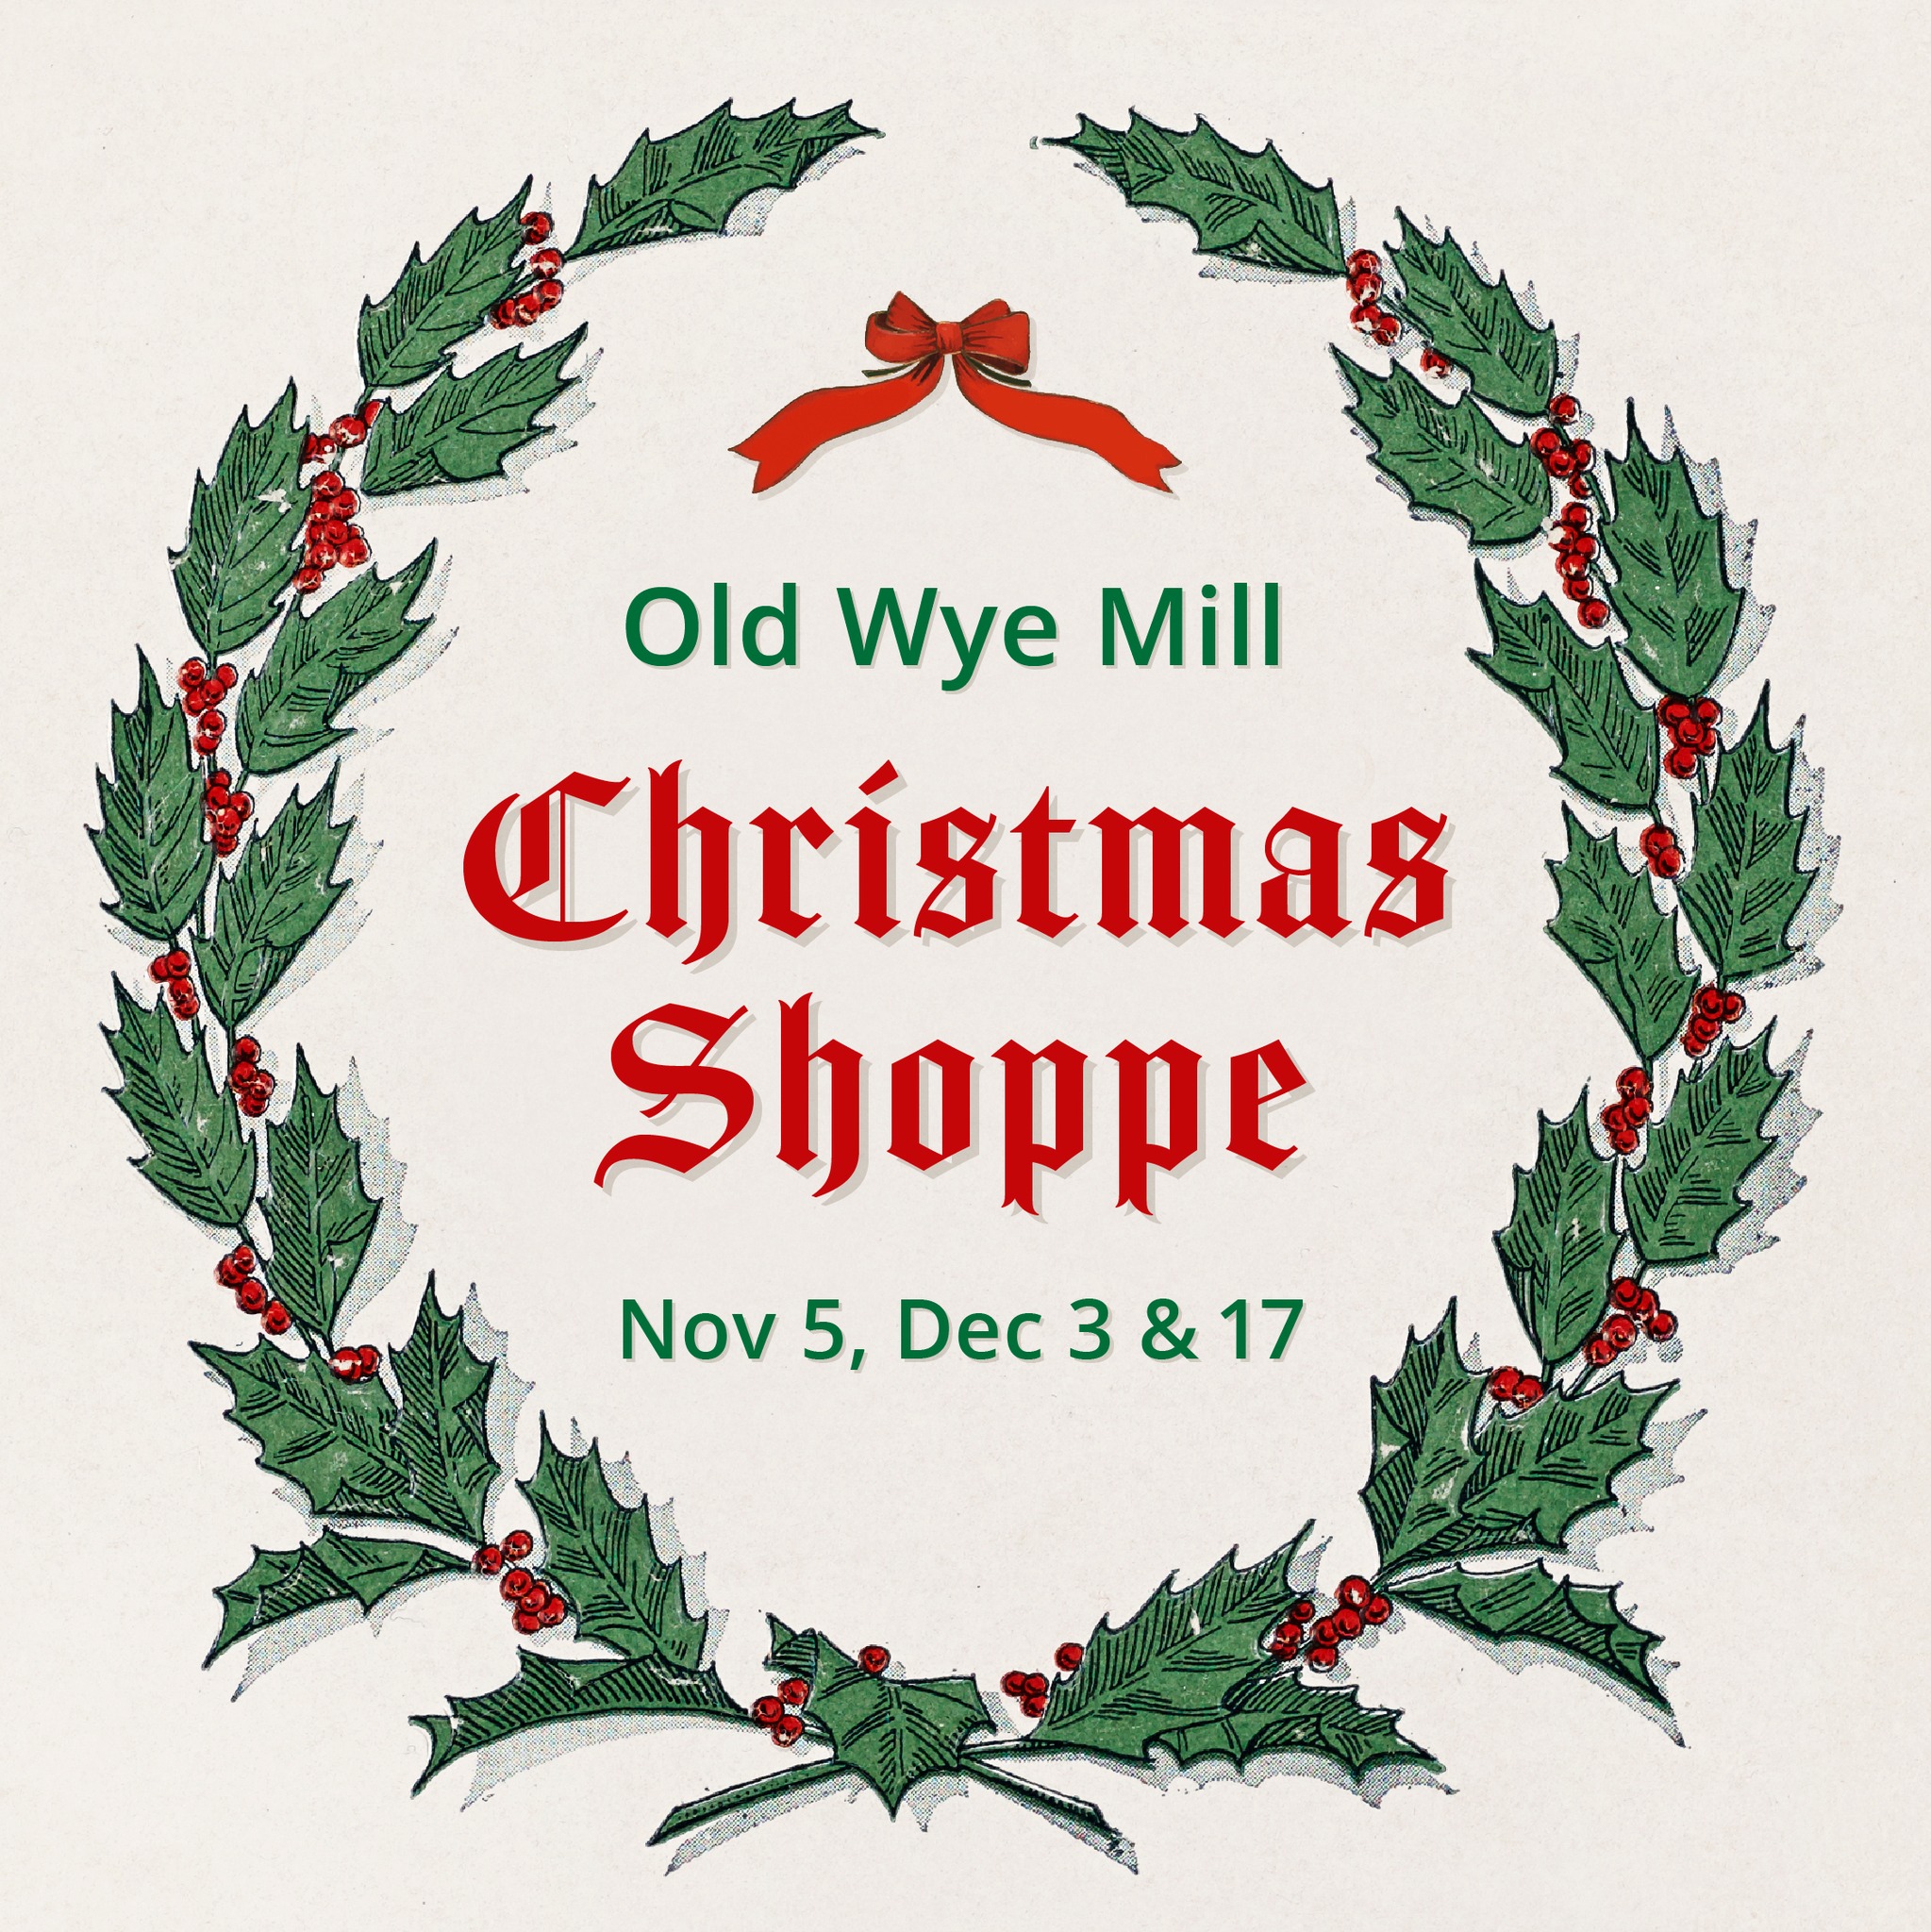 Old Wye Mill Christmas Shoppe 2022